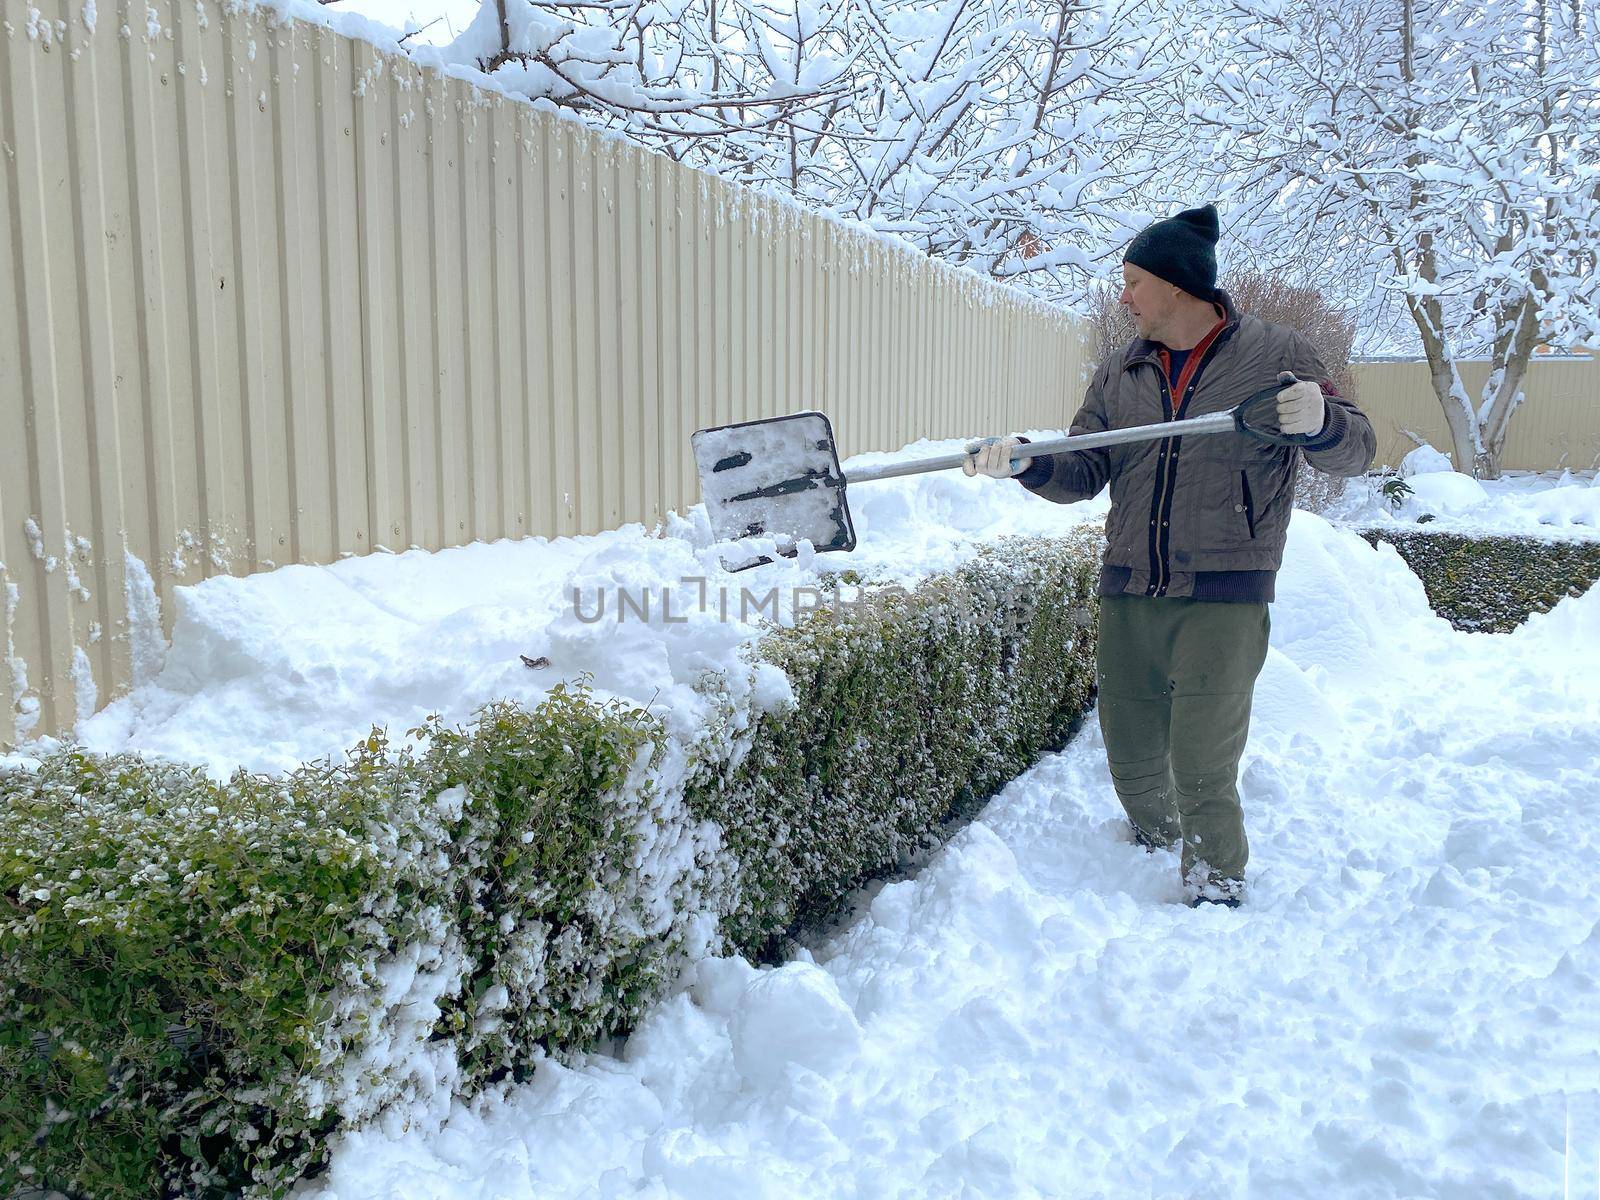 Cleaning trees after a heavy snowfall due to the danger of branches breaking. Winter gardening. A man using a snow shovel shakes snow from privet branches.